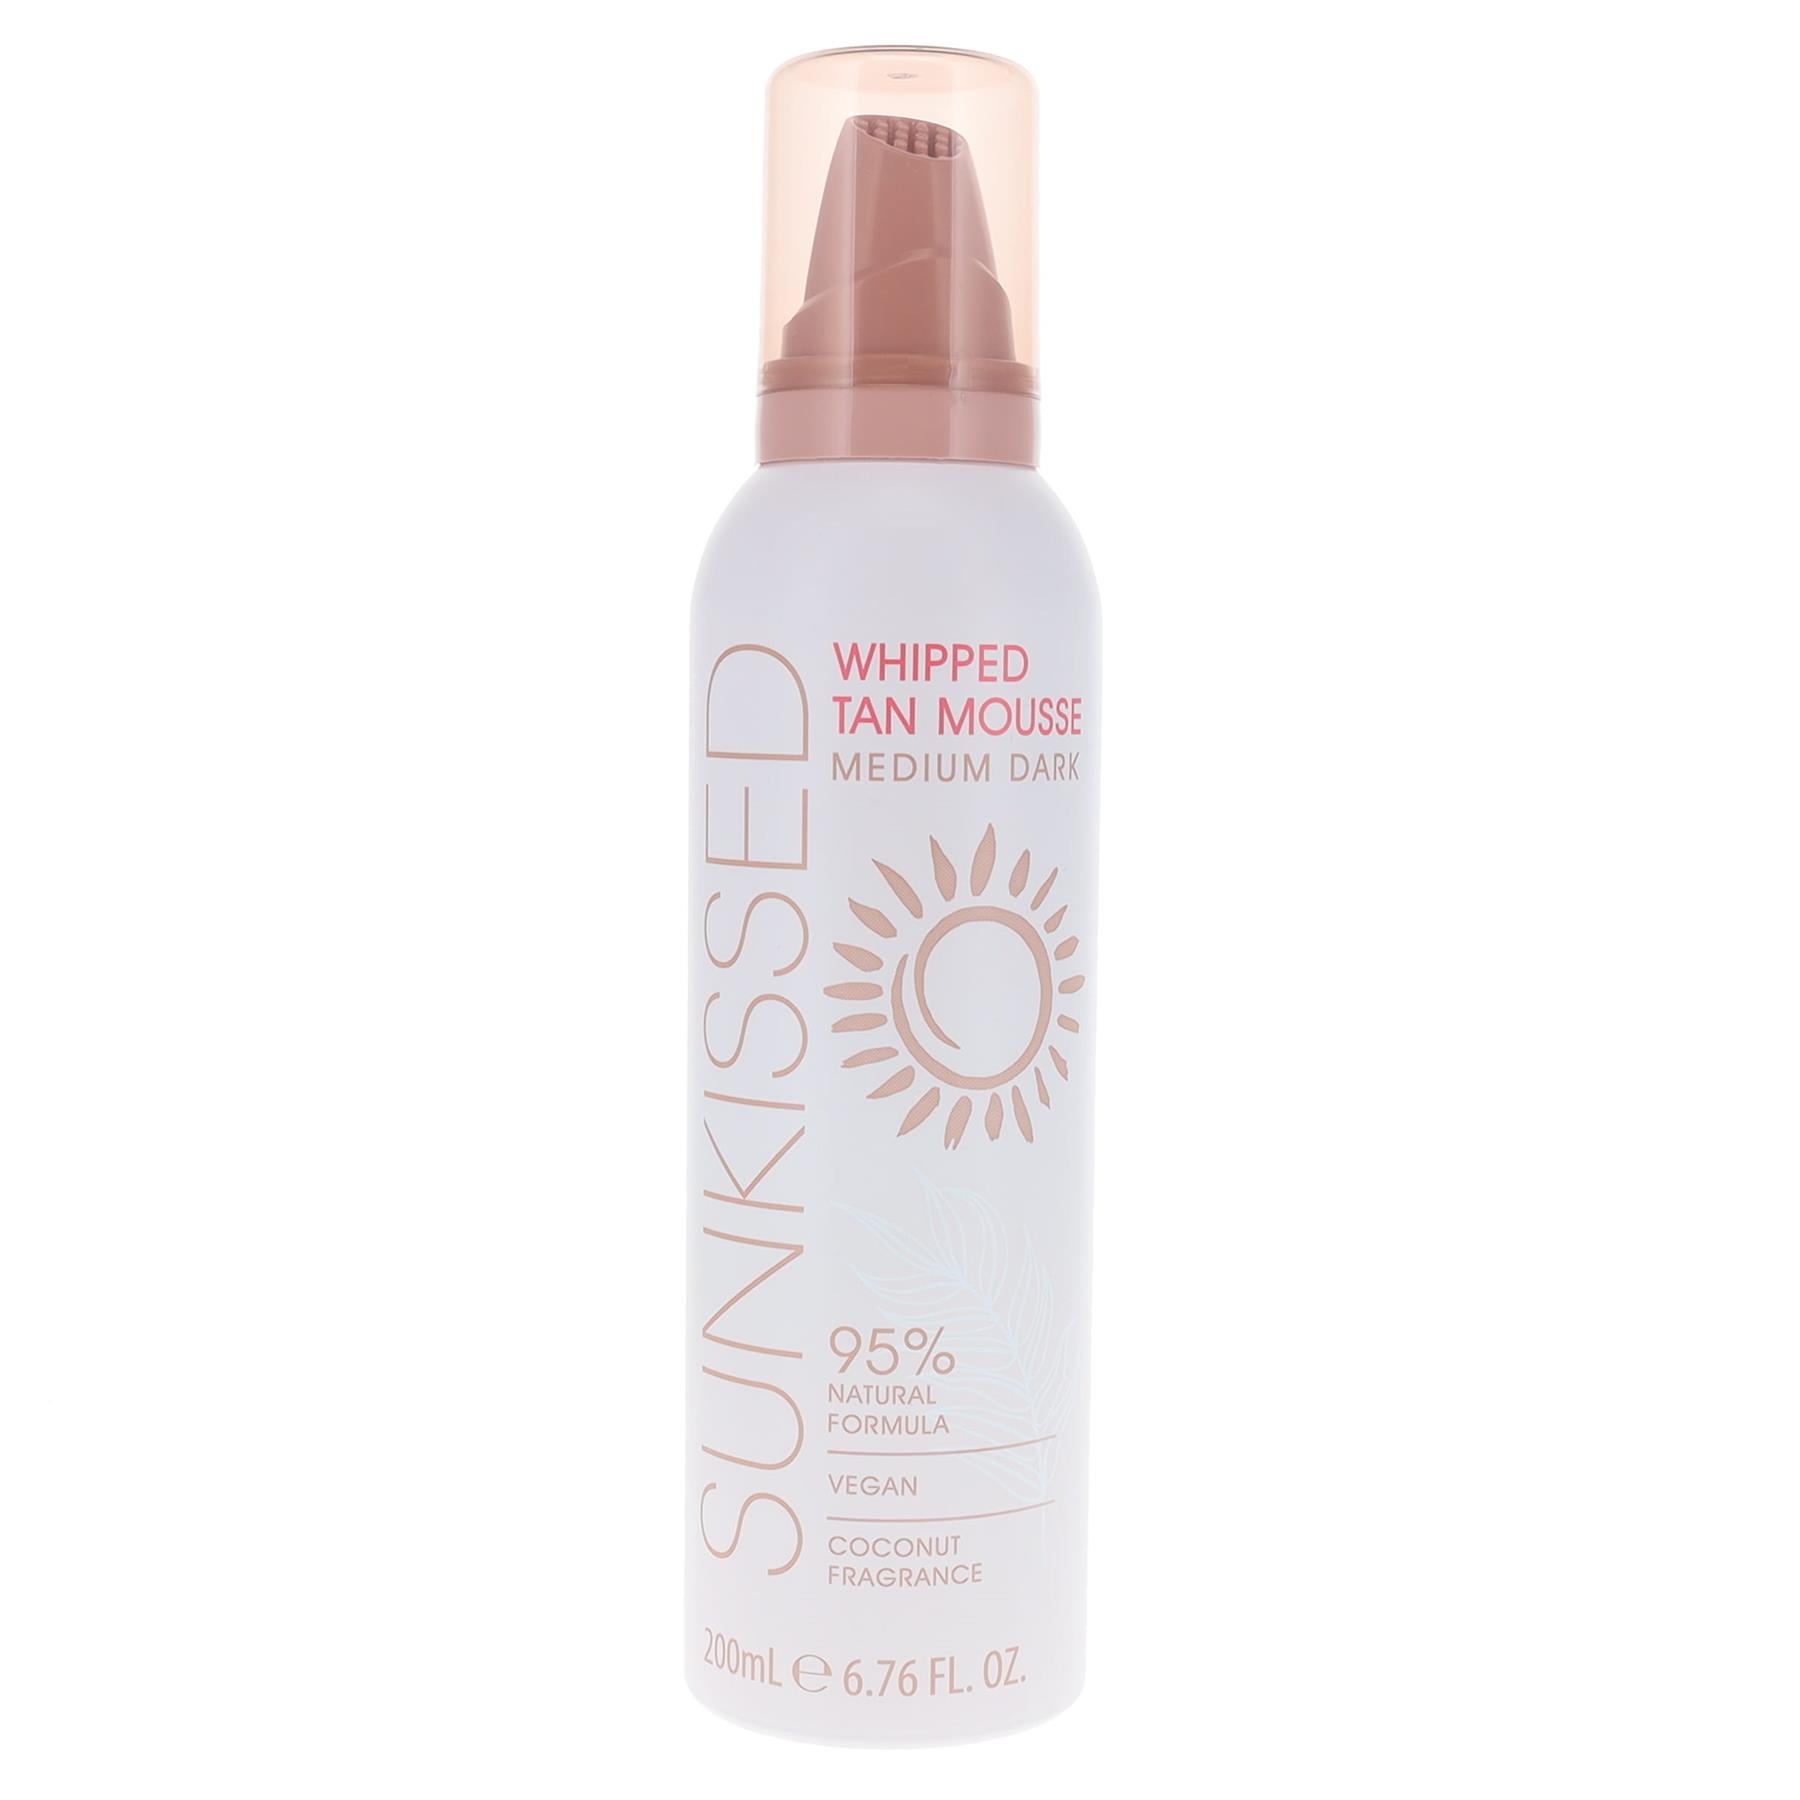 Sunkissed Whipped Tan Mousse 200ml - Medium to Dark from Perfume Plus Direct